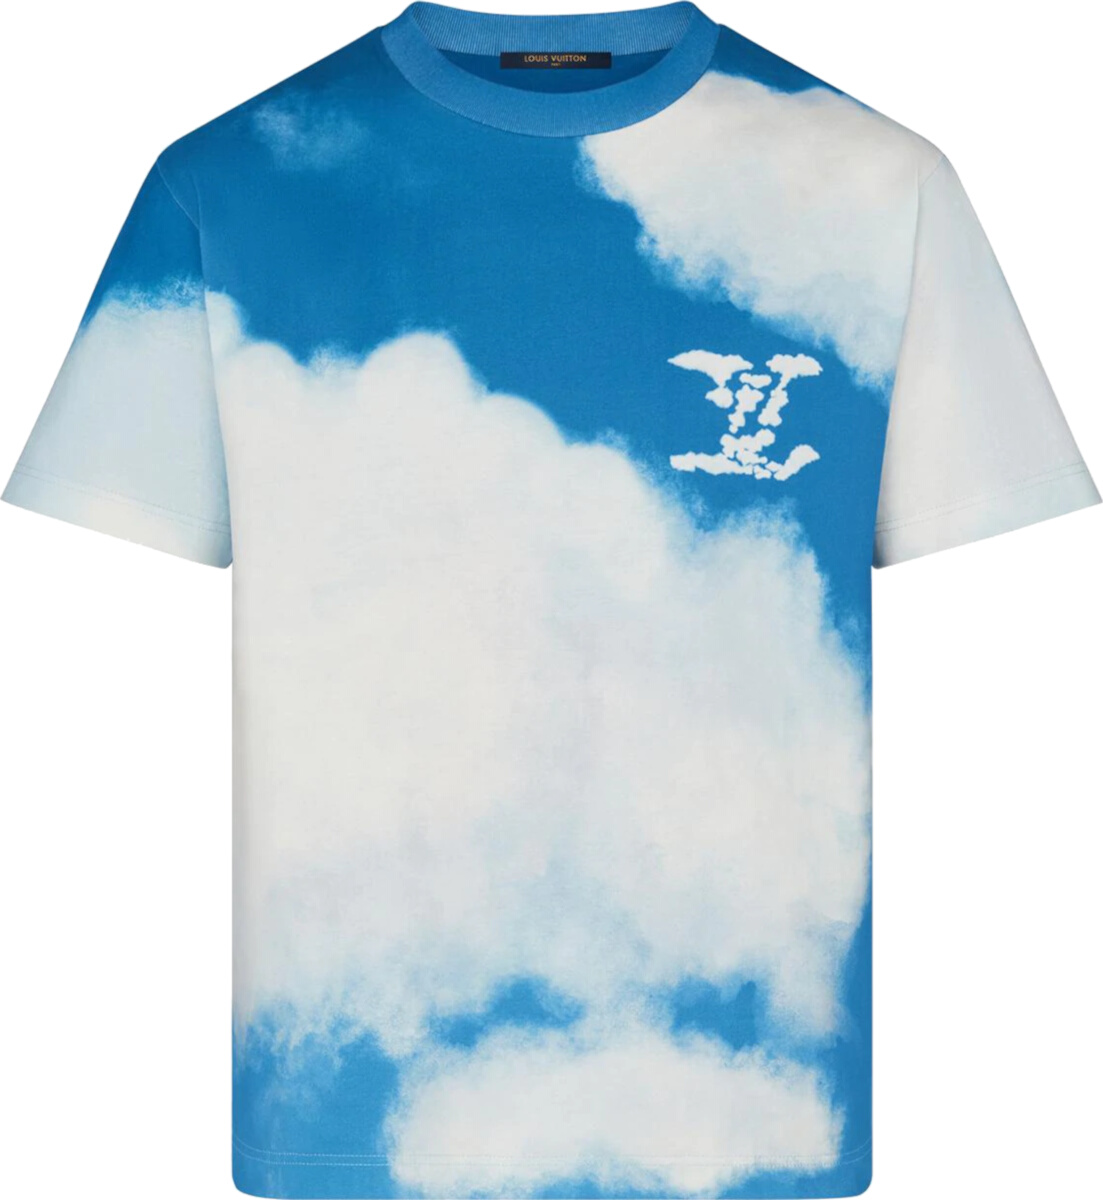 Louis Vuitton Blue & White Clouds Print T-Shirt | Incorporated Style